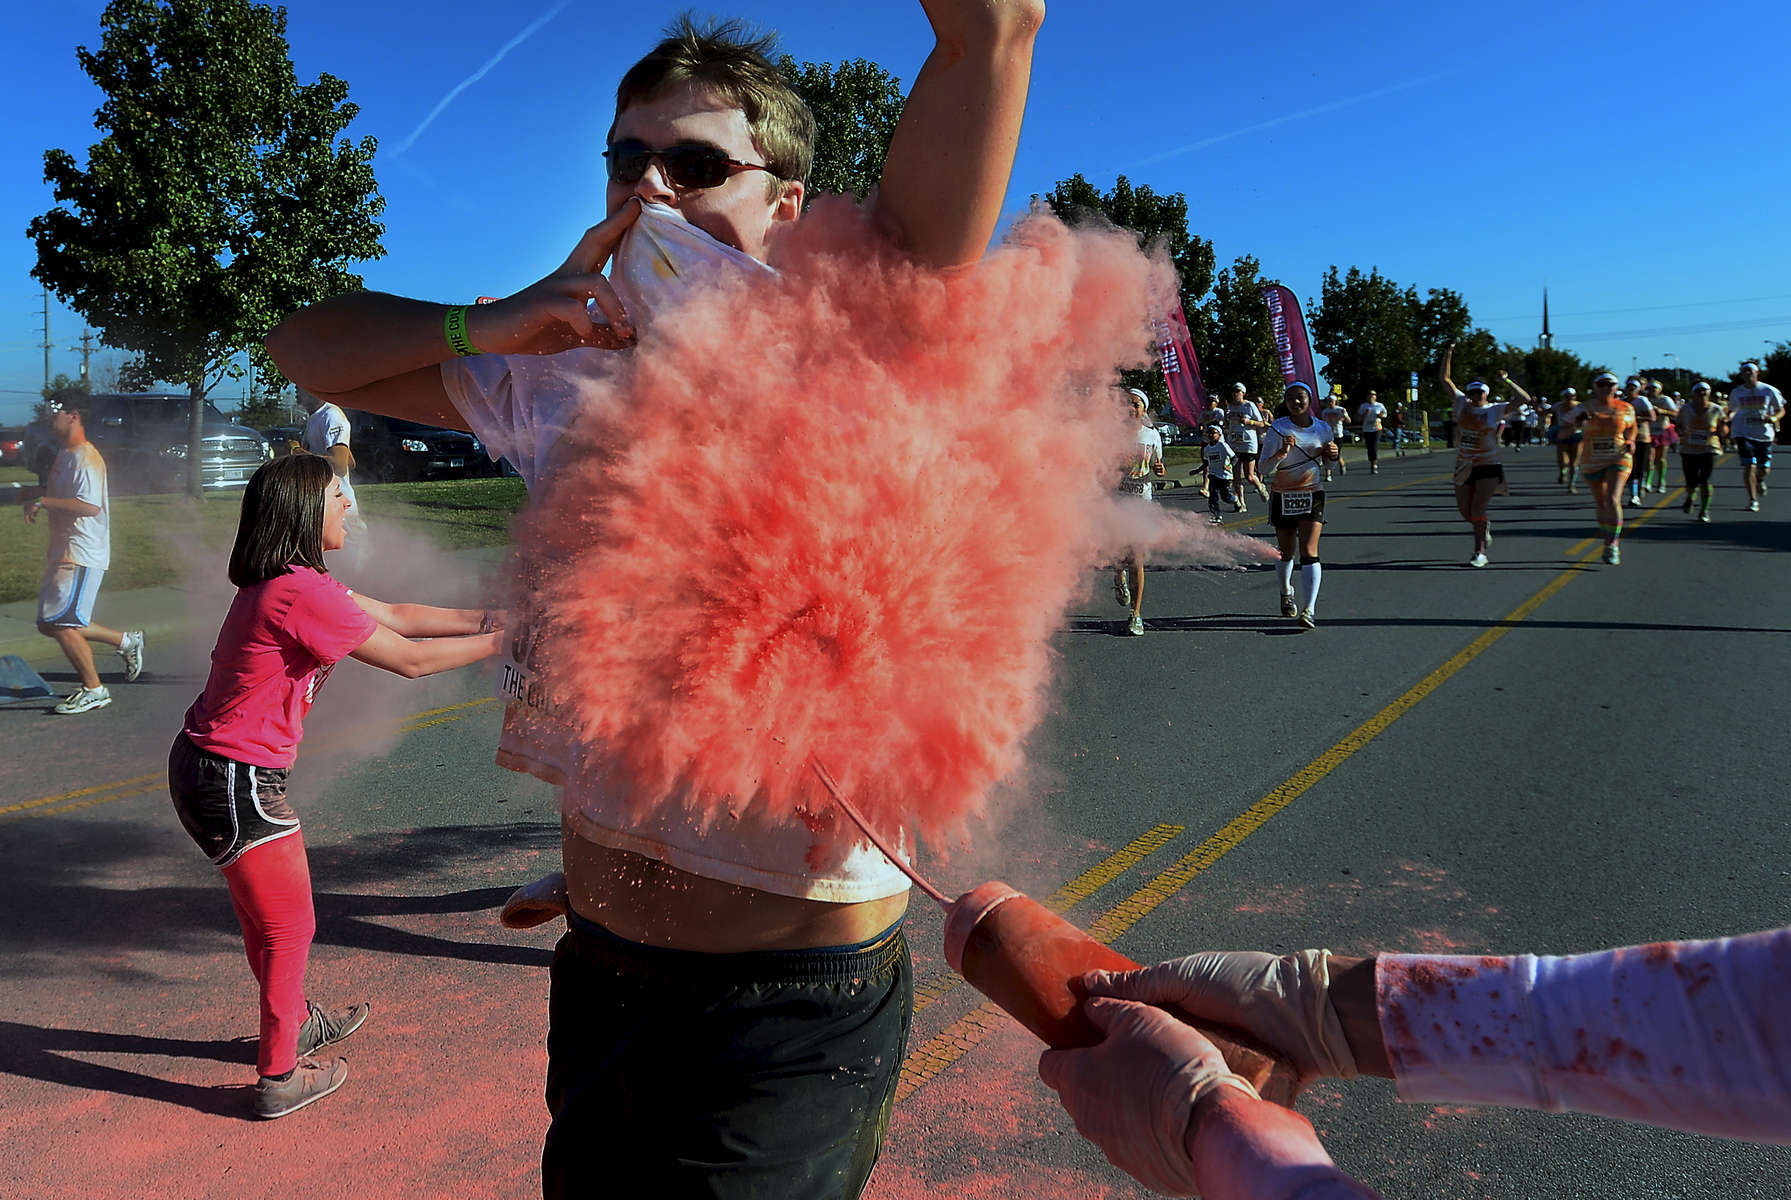 A participant covers his mouth while being sprayed with pink powder at the 3K mark along Russell Street during the 5K Color Run in Nashville, Tenn (Mark Zaleski/ For The Tennessean)